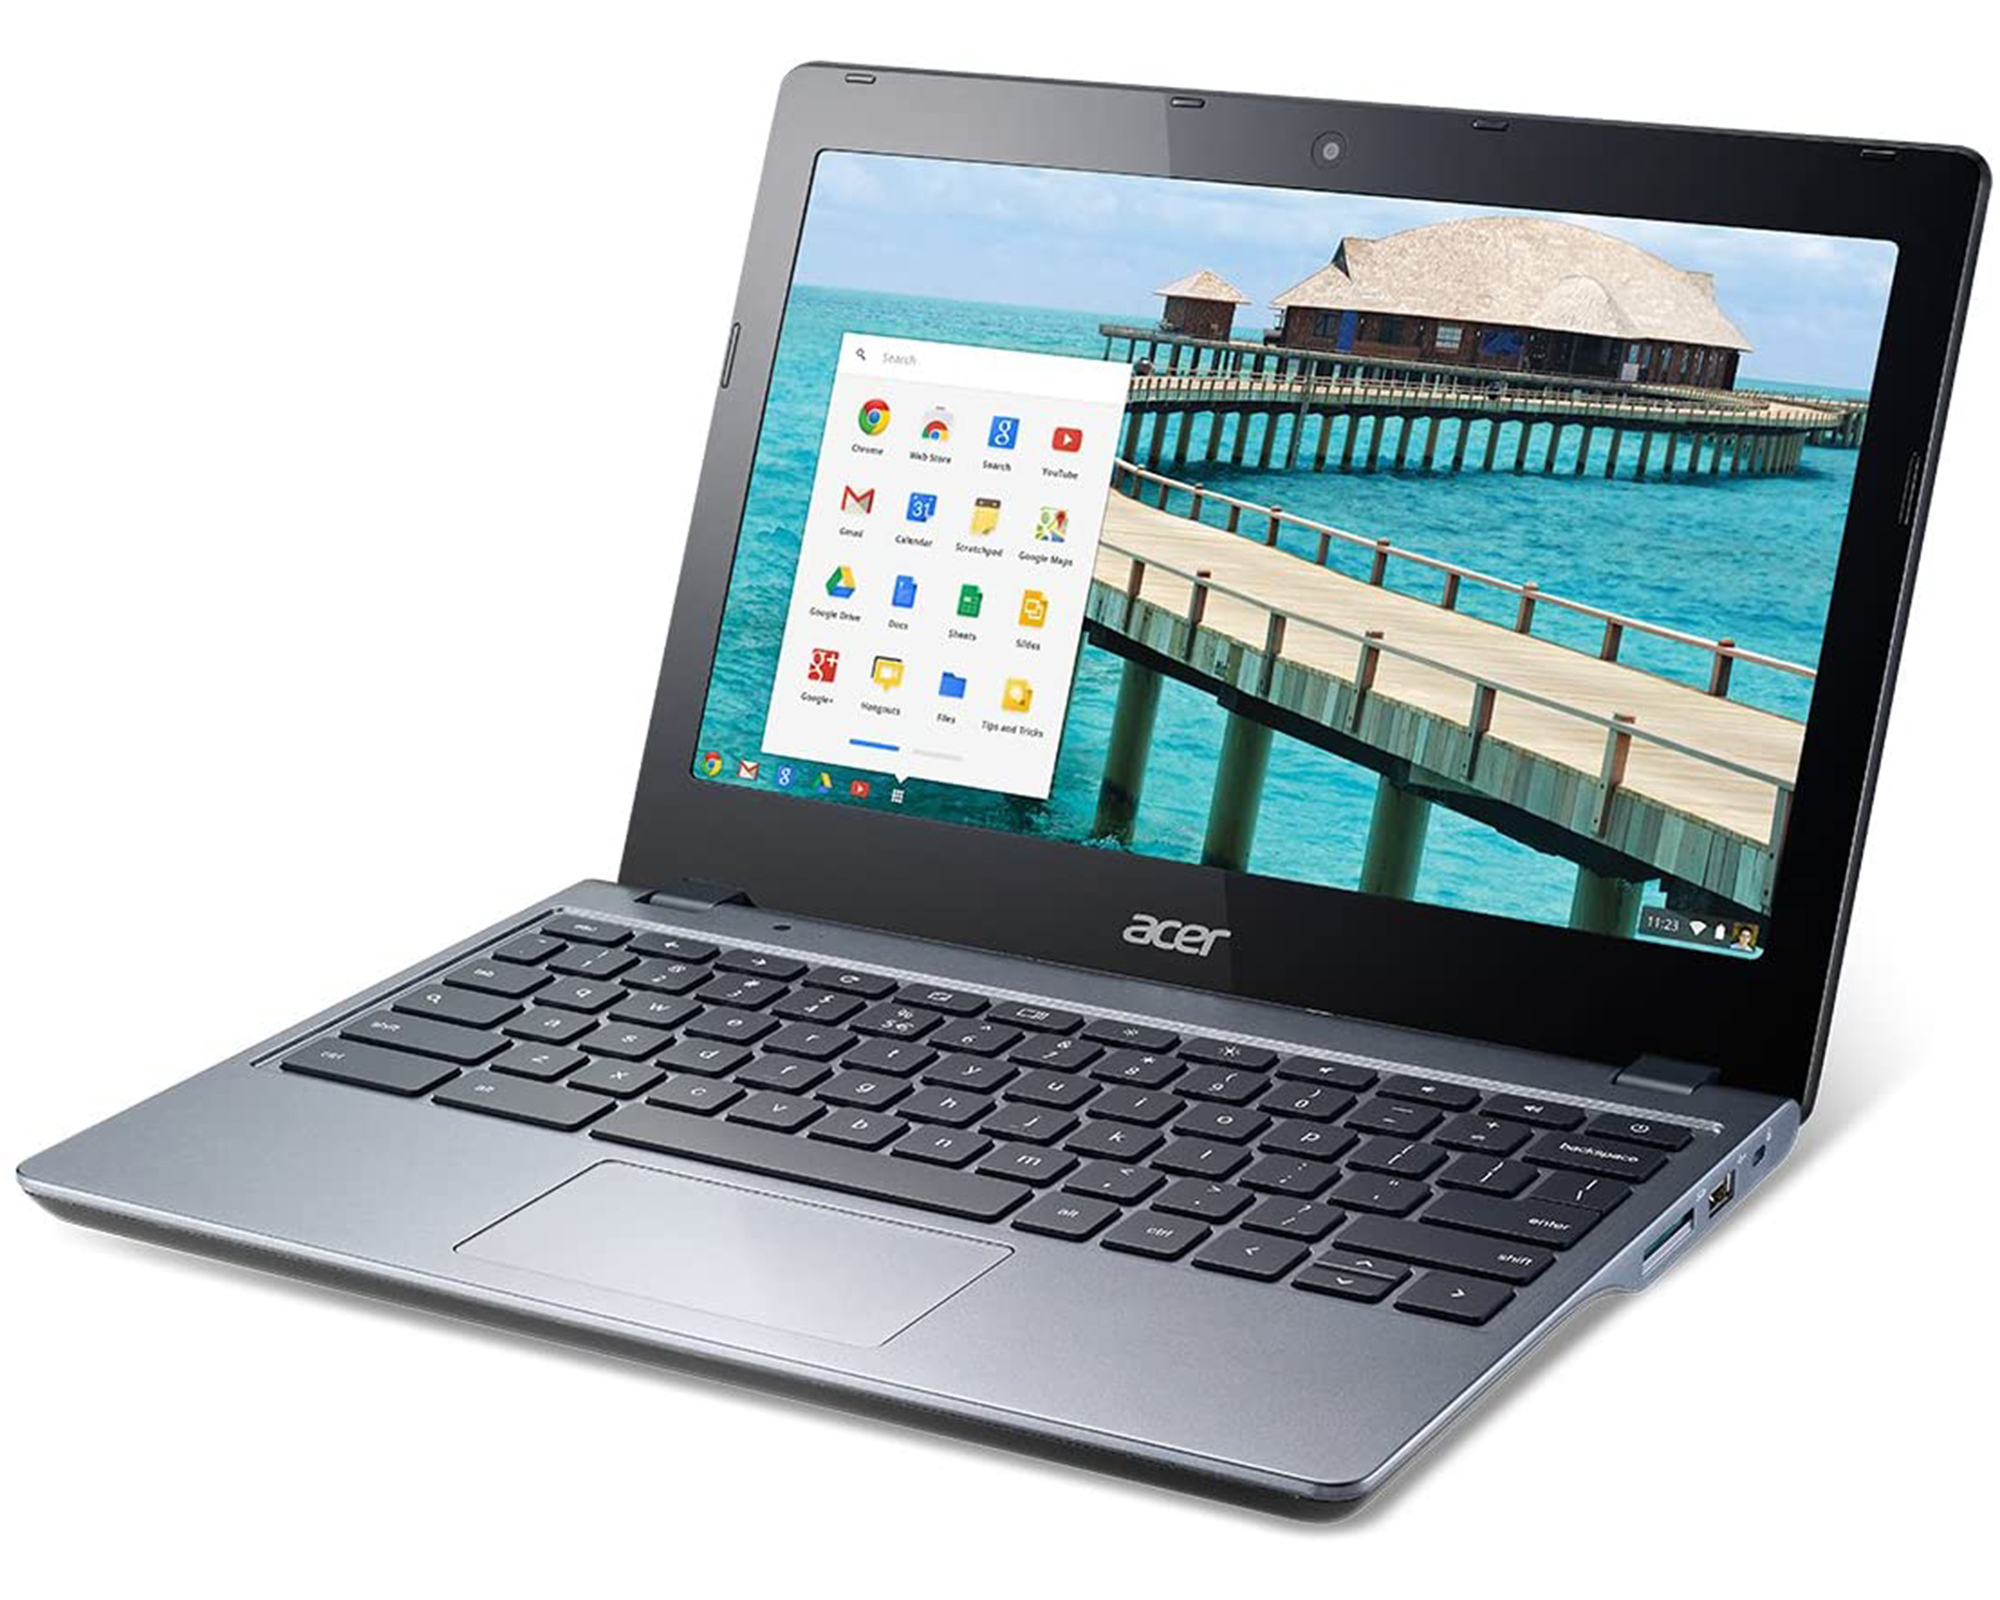 Restored Details about Acer C720-2103 11.6 in chromebook, Intel Celeron 1.4GHz 2GB Ram - image 1 of 8